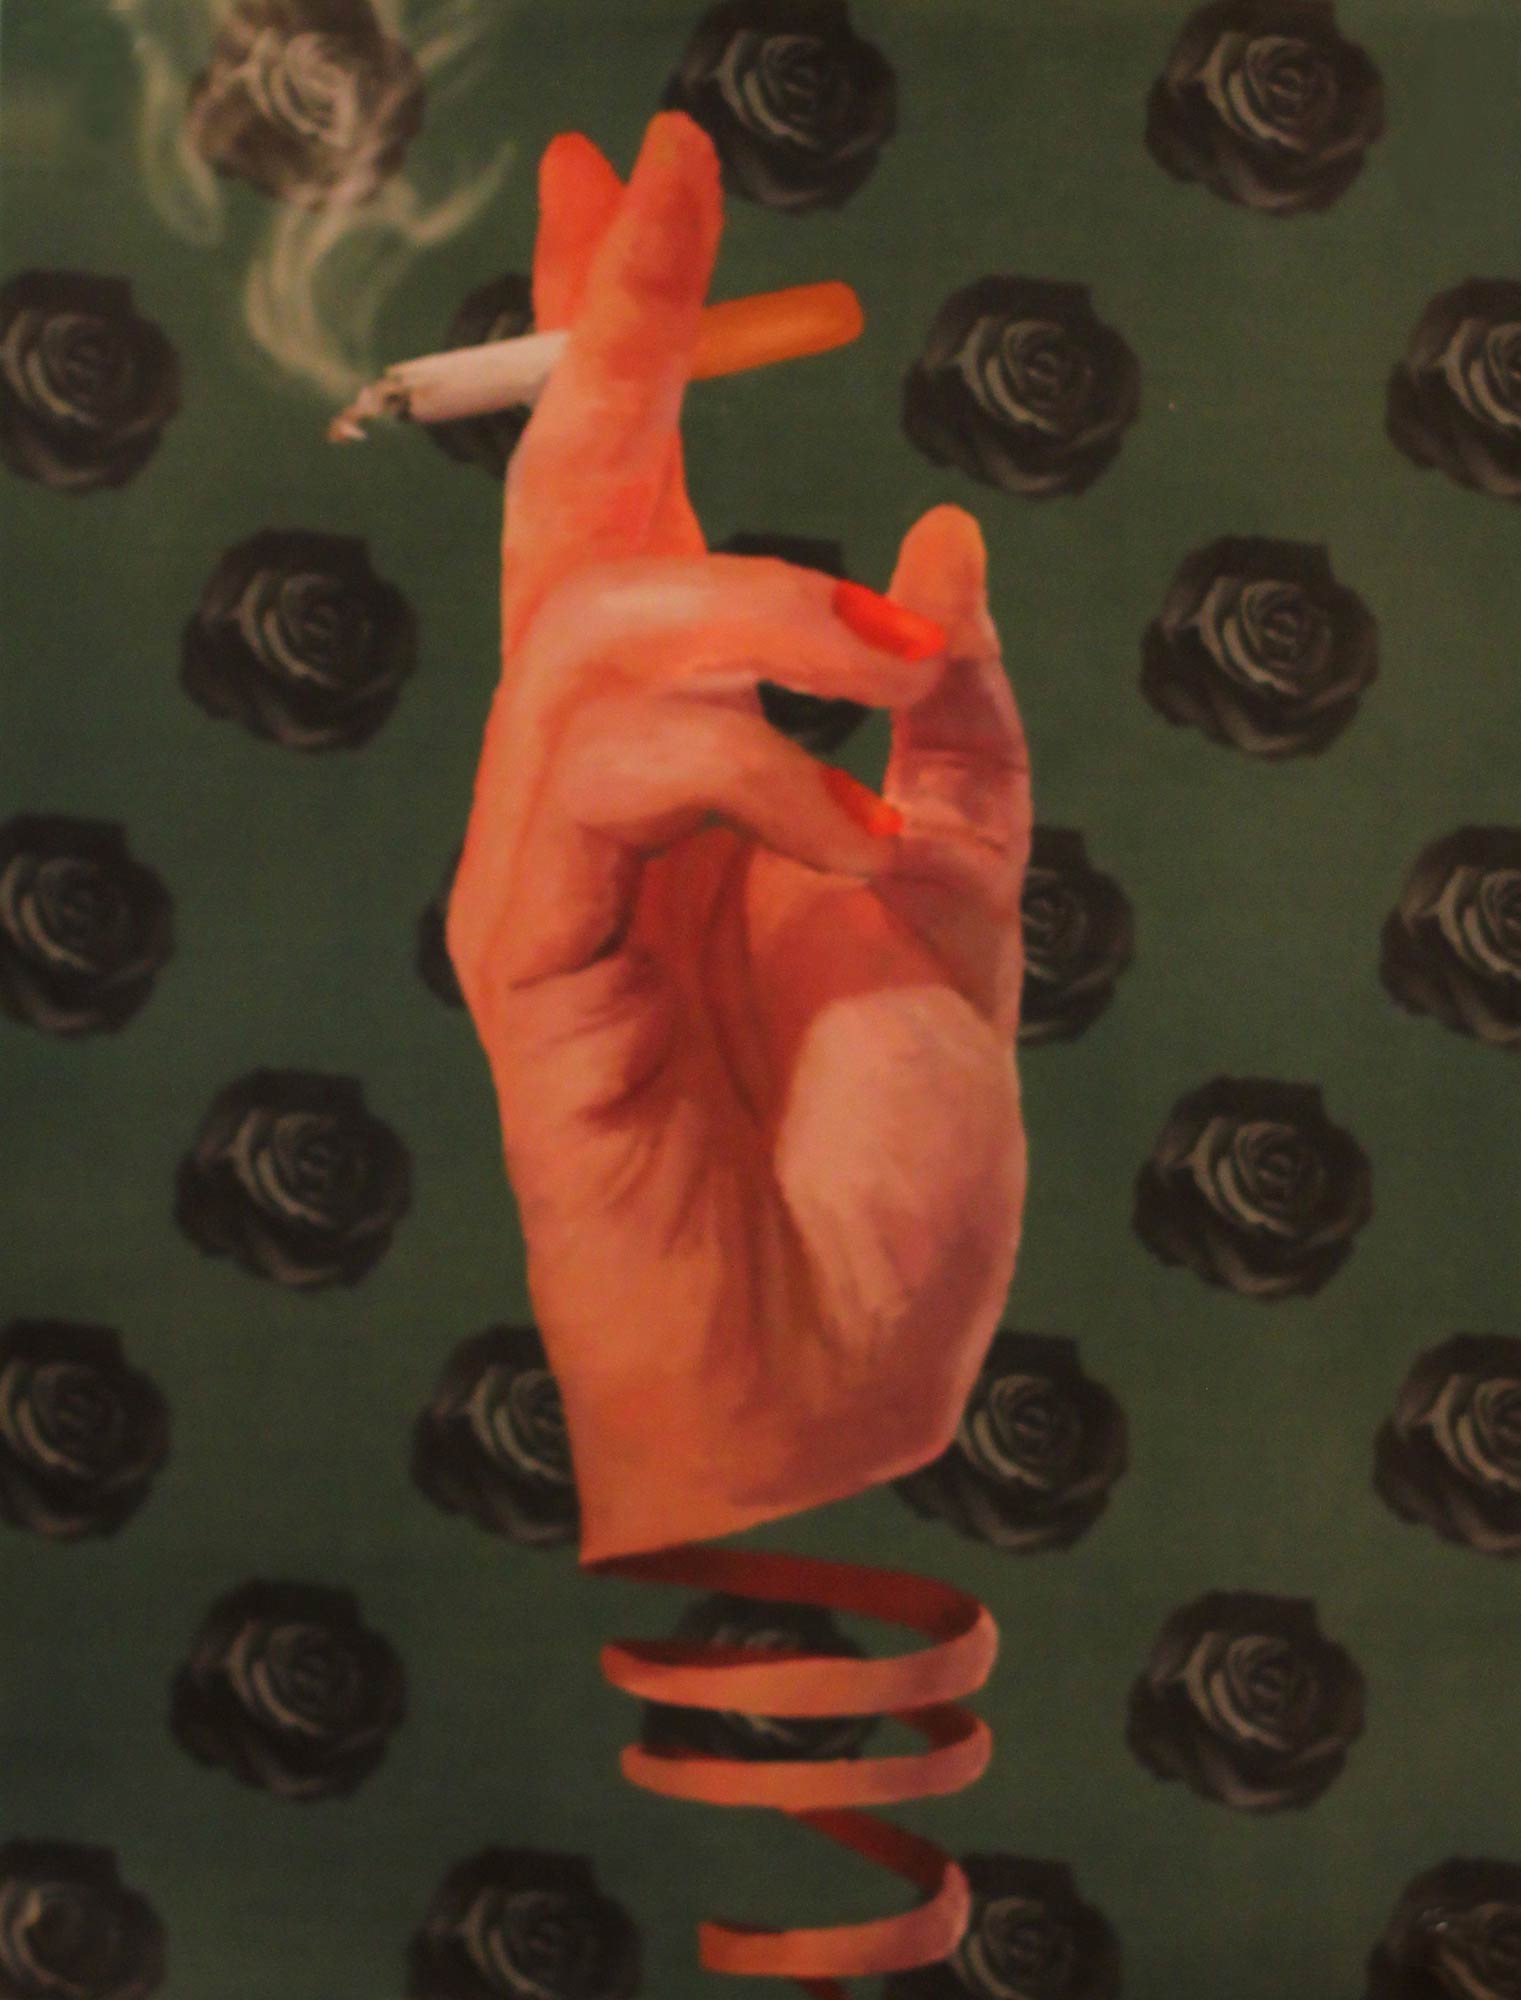 A painting of a hand holding a cigarette